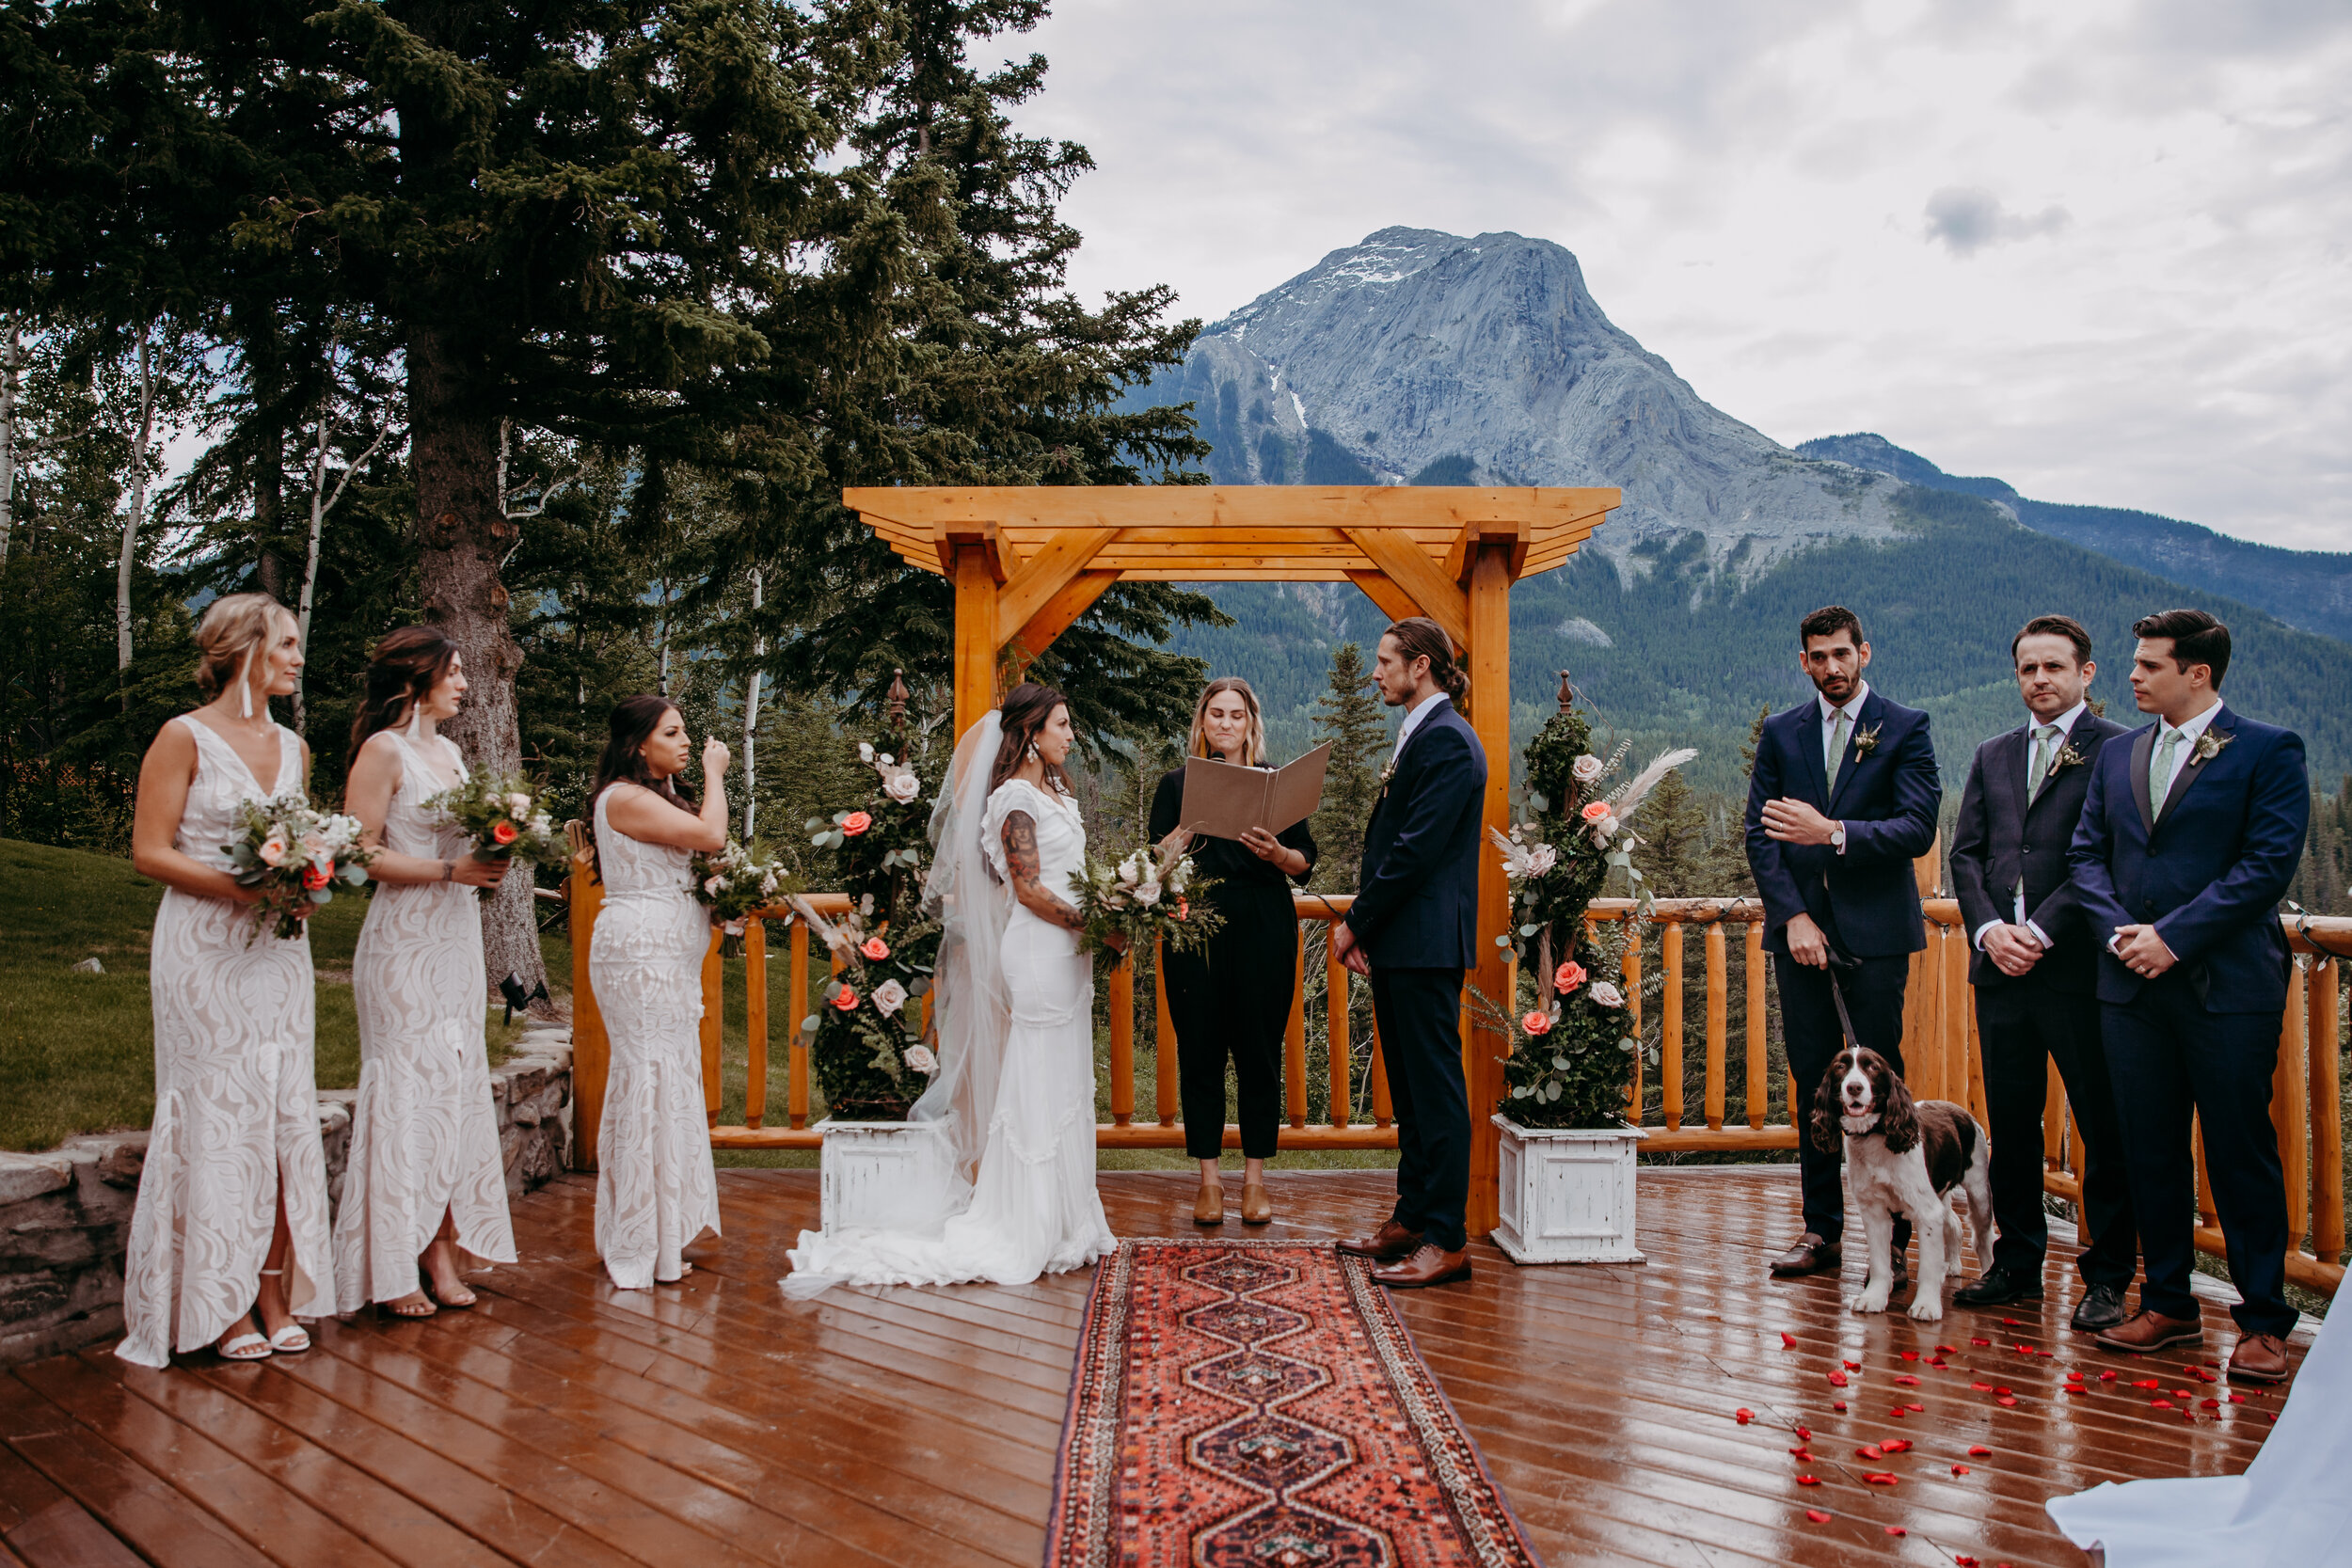 Wedding Ceremony at Overlander Mountain LodgeBride & Groom in the Rocky Mountains | Jamie Robson Photography | Elopement & Wedding Photographer in Jasper (Copy)